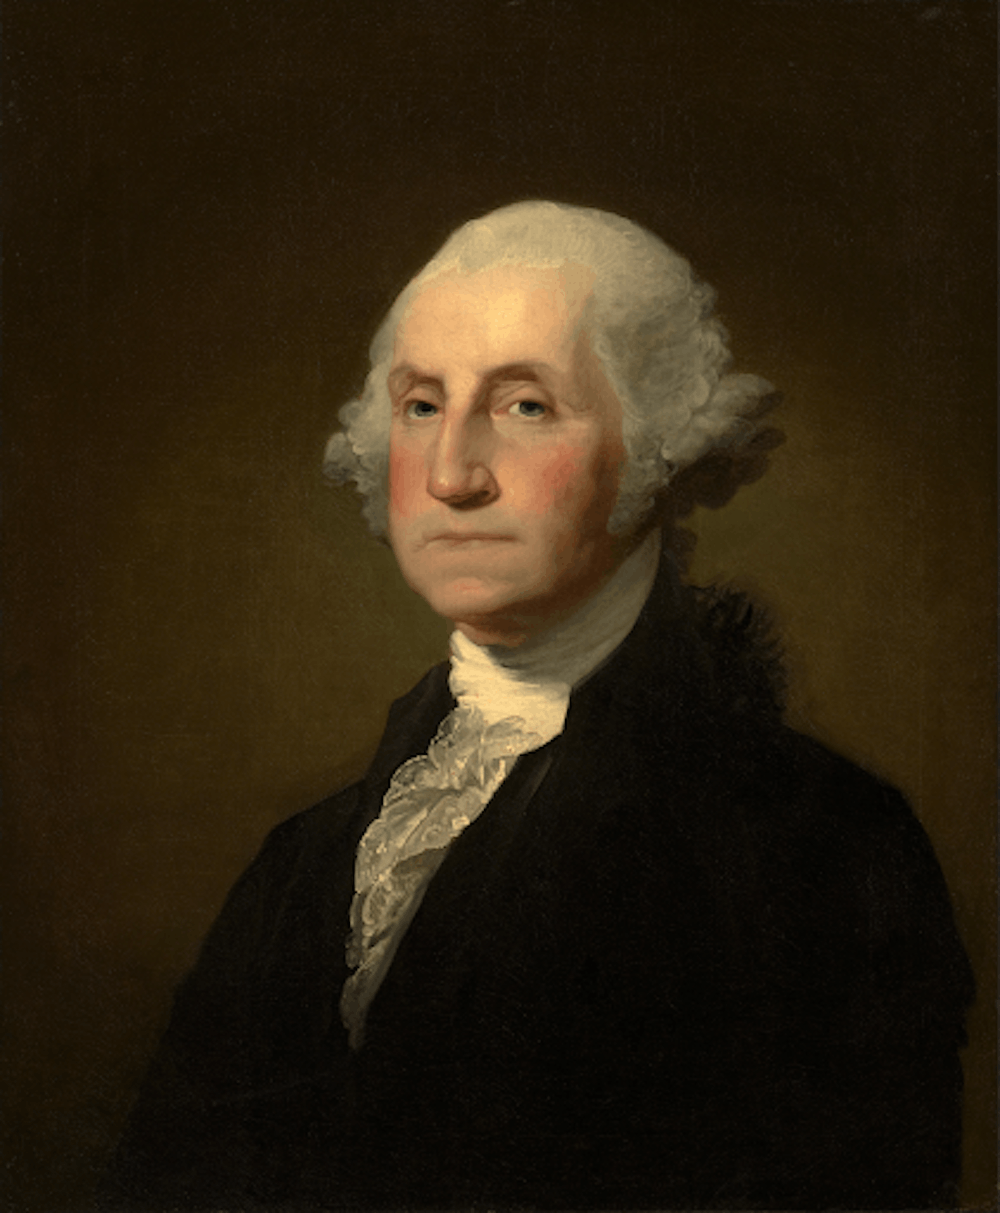 <p><em>George Washington&#x27;s influential leadership in the 1700s has had a significant impact on the modern United States, allowing the nation to celebrate his legacy on President&#x27;s Day (Photo courtesy of </em><a href="https://commons.wikimedia.org/wiki/File:Gilbert_Stuart_Williamstown_Portrait_of_George_Washington.jpg" target=""><em>Wikimedia Commons</em></a><em> / “Gilbert Stuart Williamstown Portrait of George Washington” by Gilbert Stuart).</em></p>